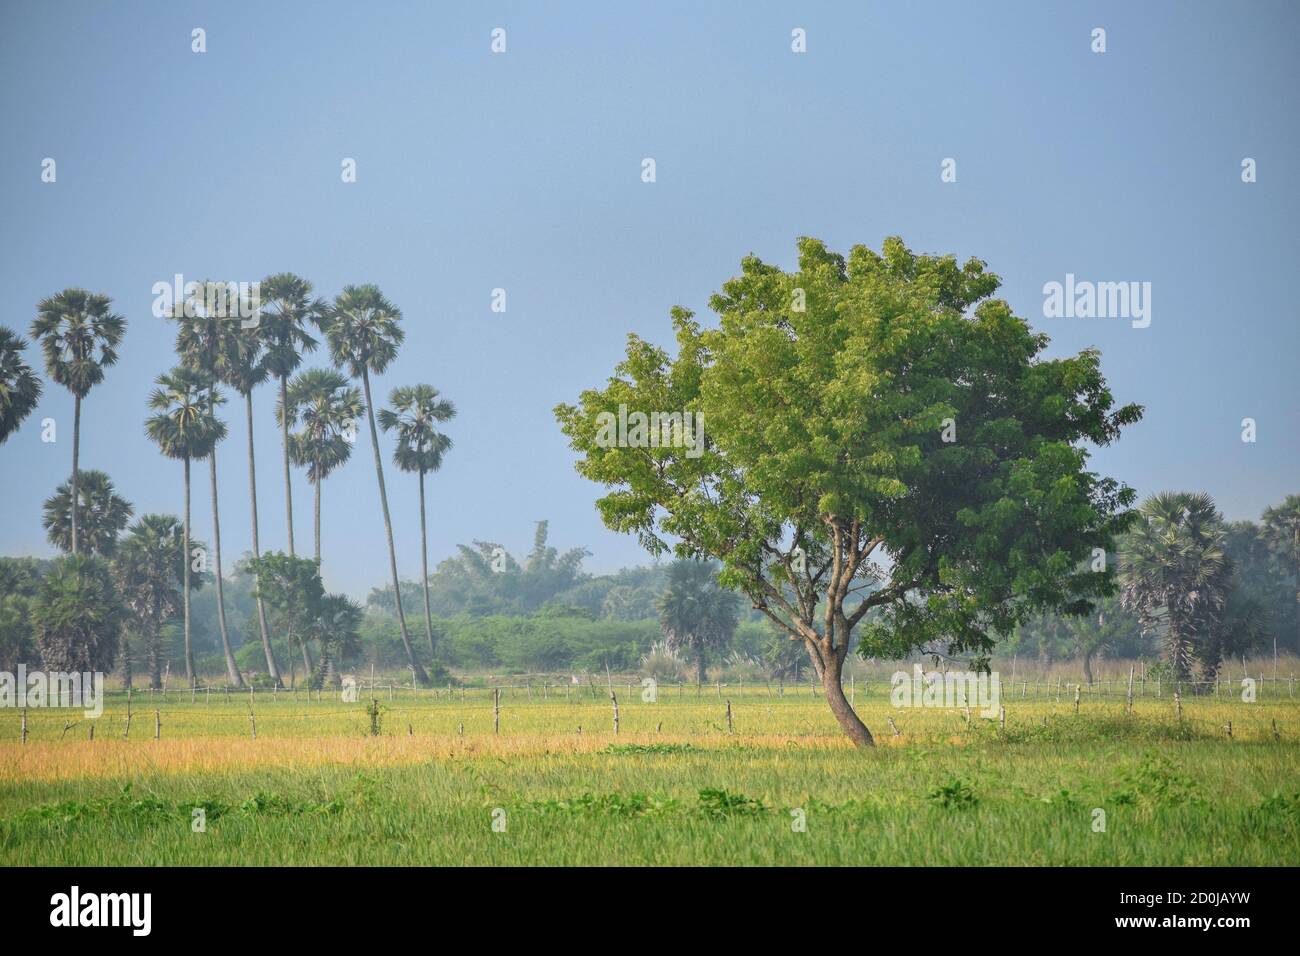 Natural landscape of an isolated medicinal neem tree (Azadirachta indica) alone in an fresh rural agricultural environment Stock Photo